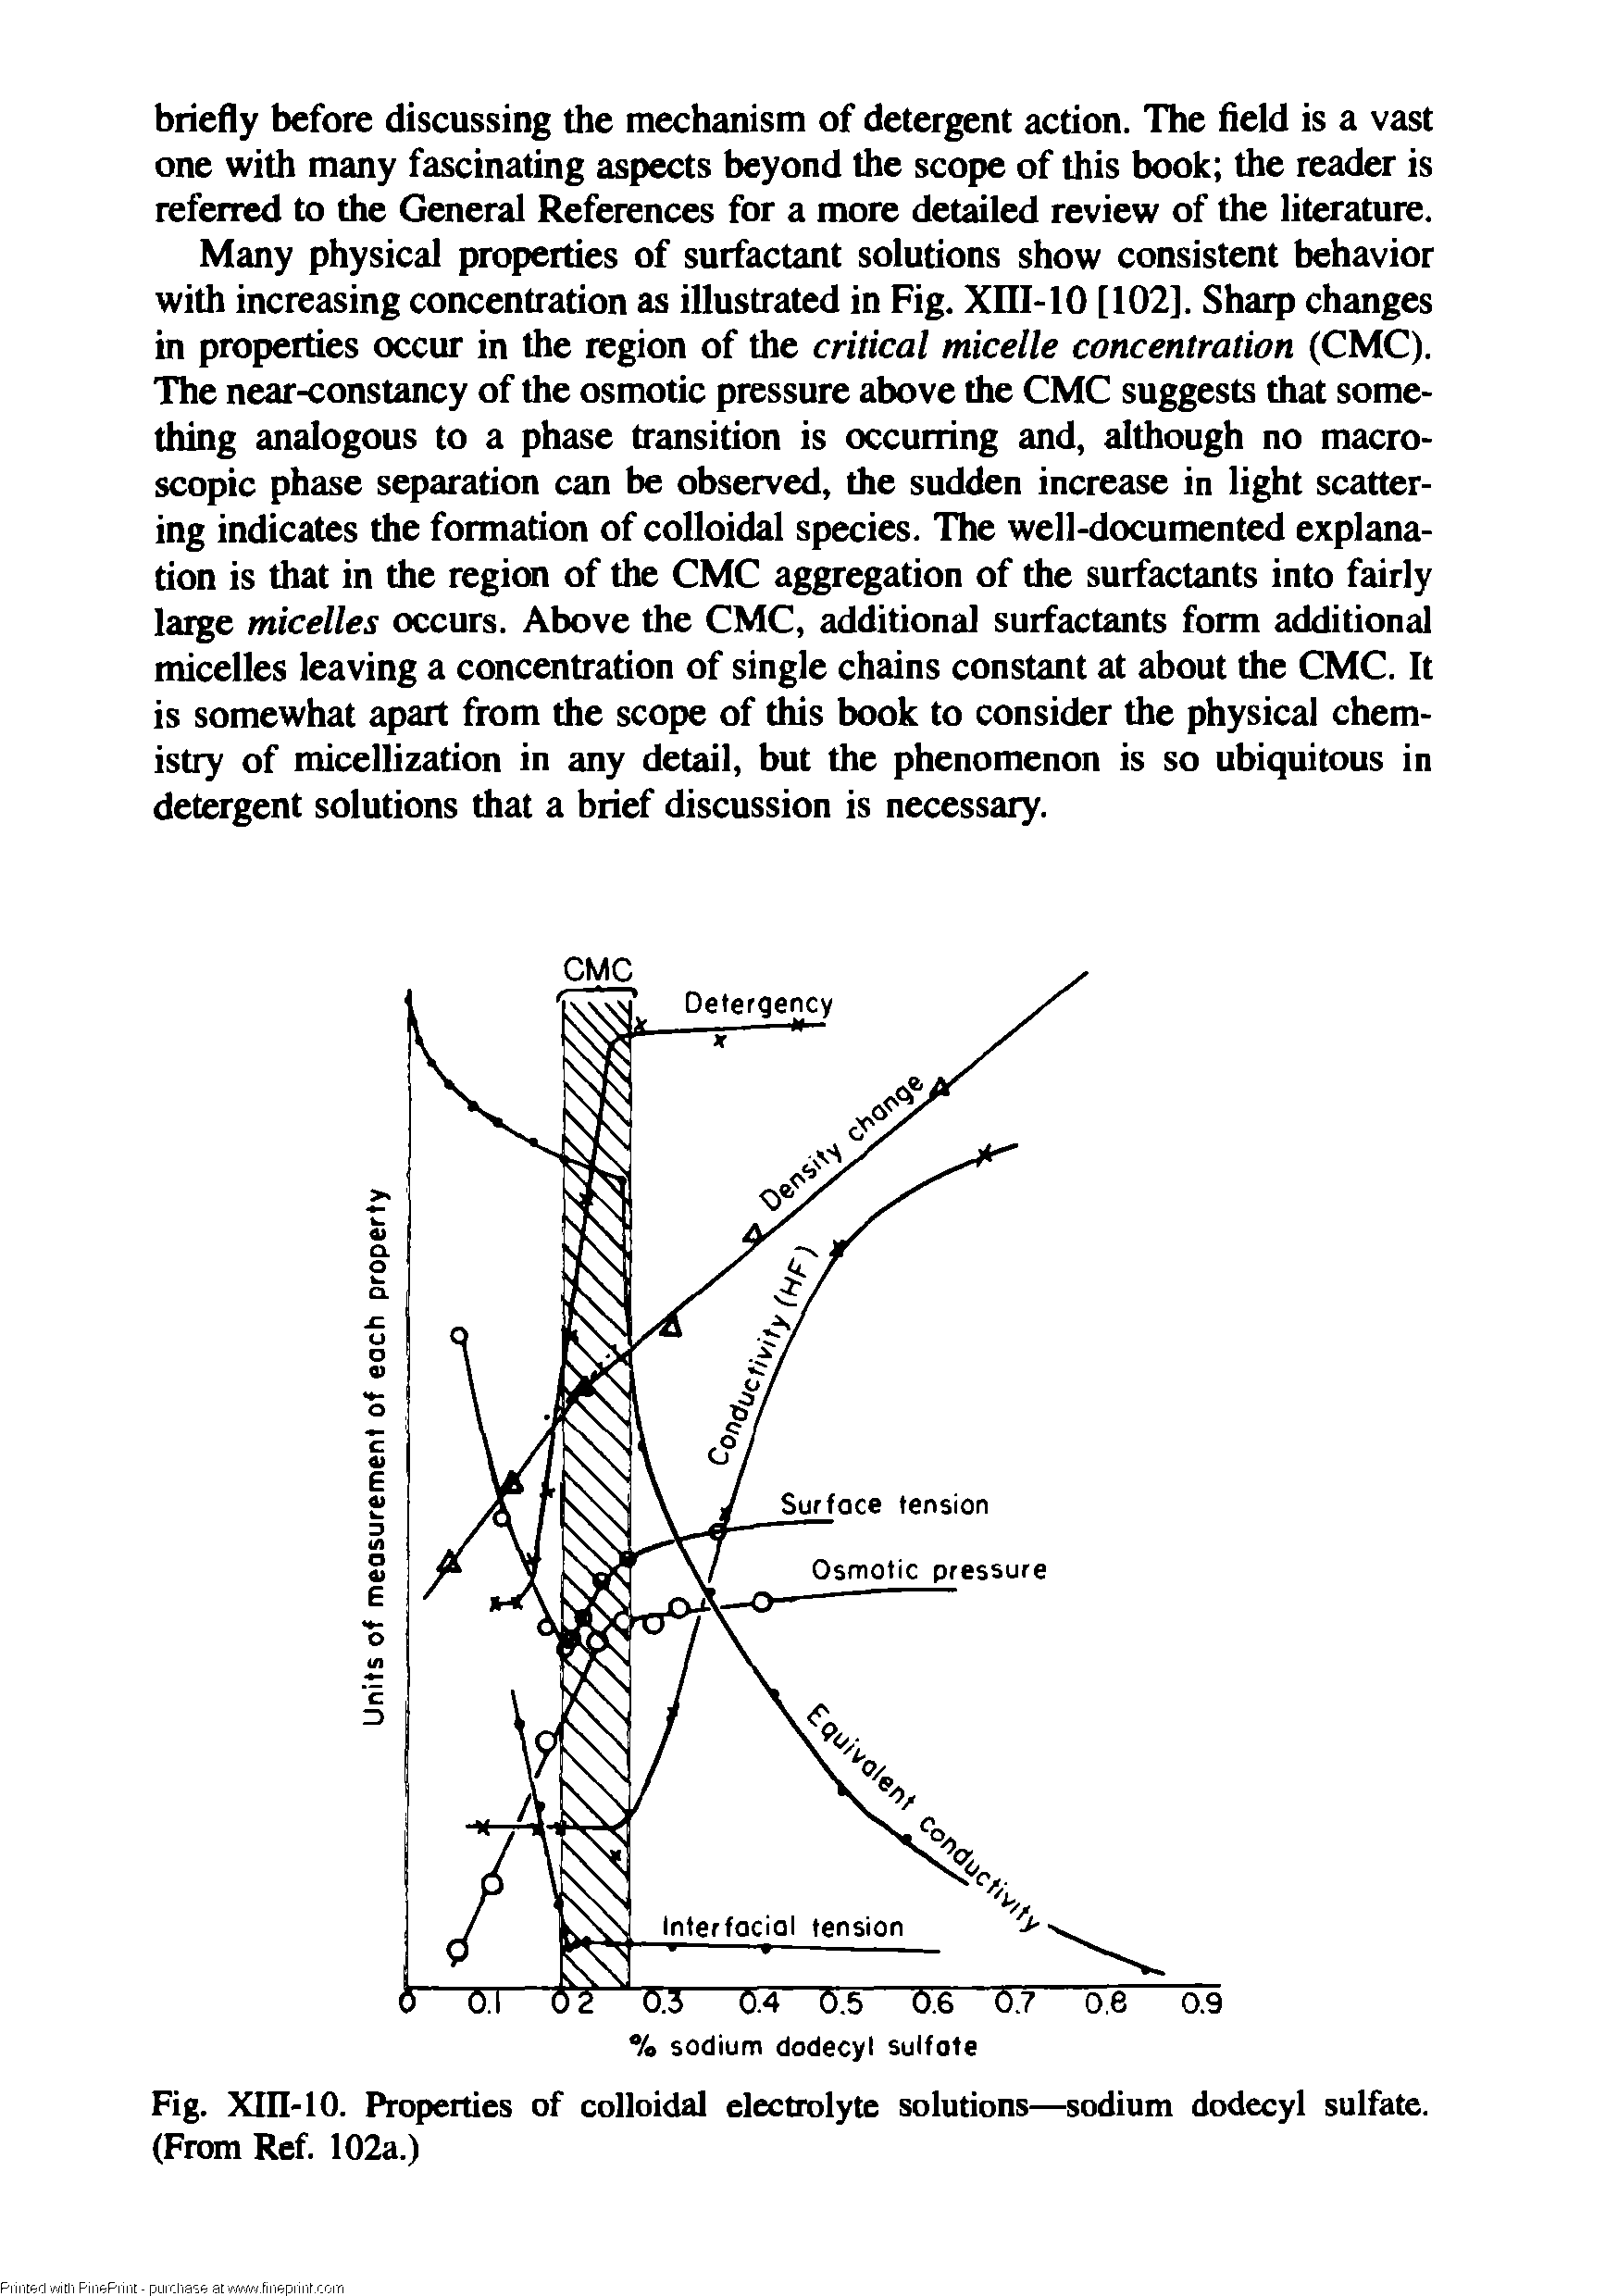 Fig. XIII-10. Properties of colloidal electrolyte solutions—sodium dodecyl sulfate. (From Ref. 102a.)...